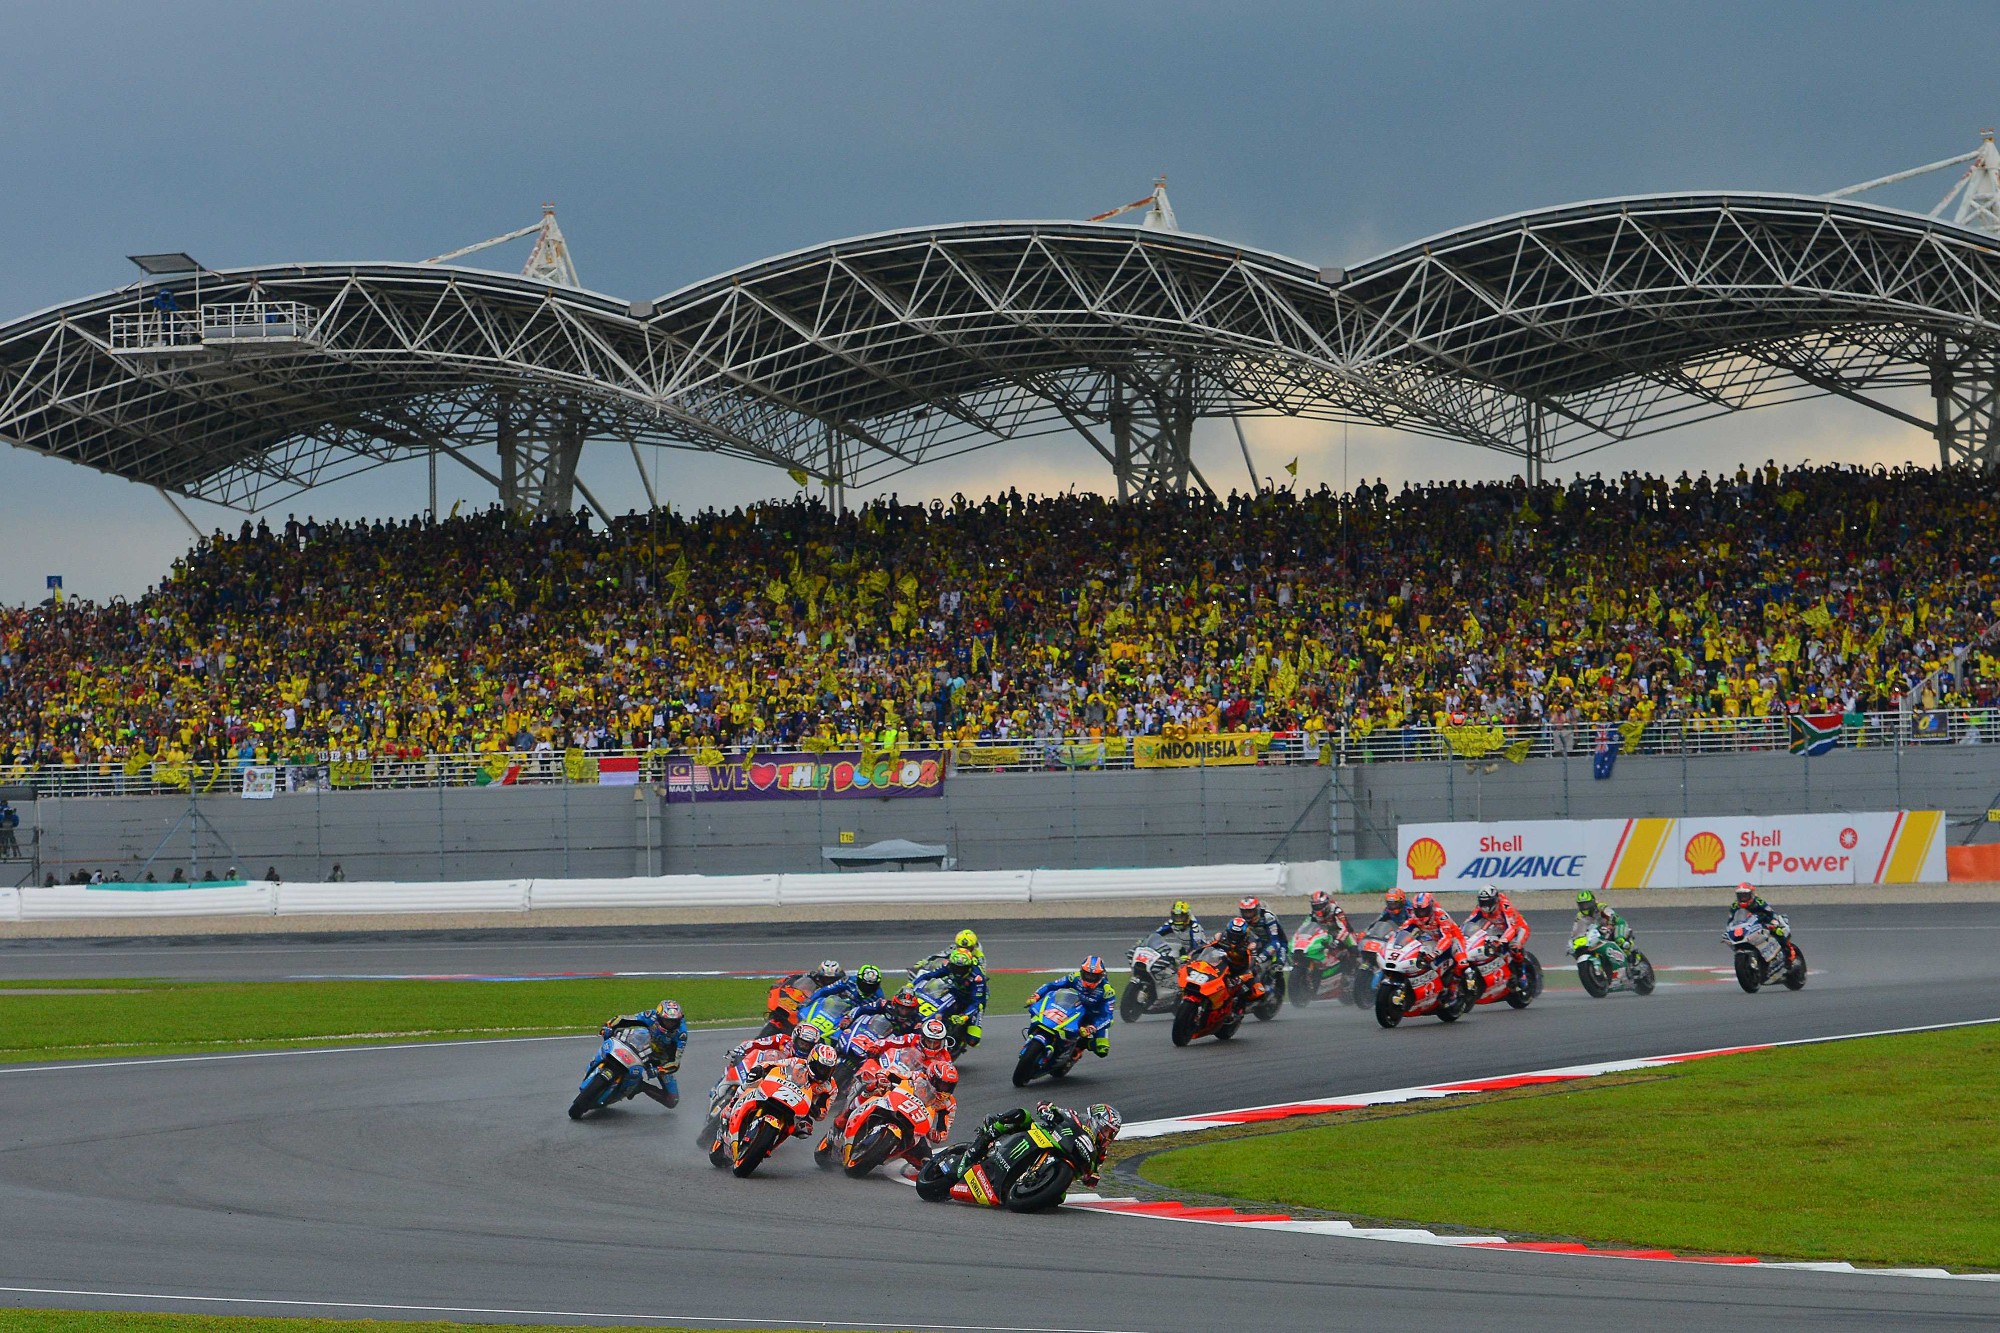 MotoGP beIN SPORTS Issues Broadcast Schedule For The Malaysian Grand